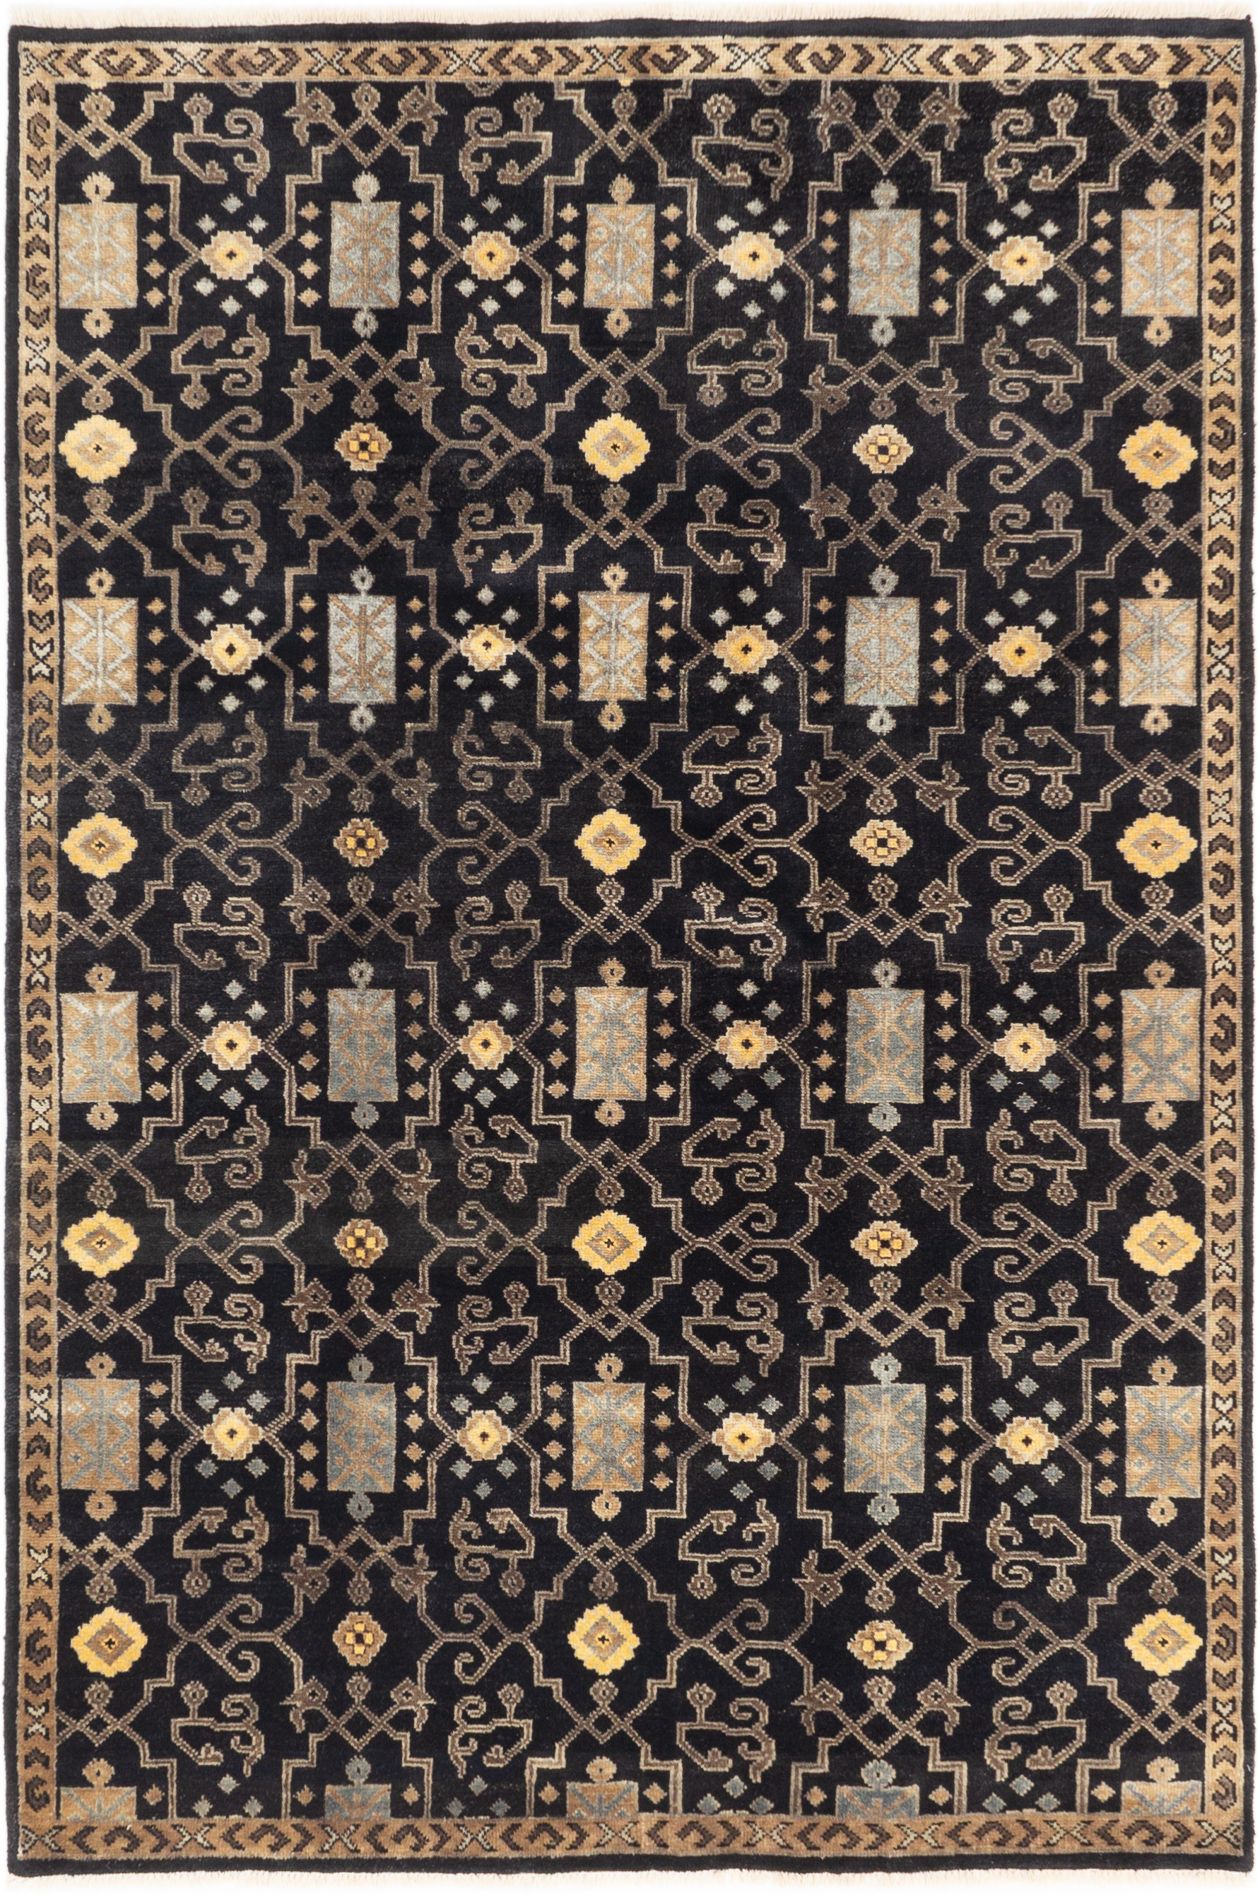 Hand-knotted Ikat Royale Black Wool Rug 6'0" x 9'0" Size: 6'0" x 9'0"  